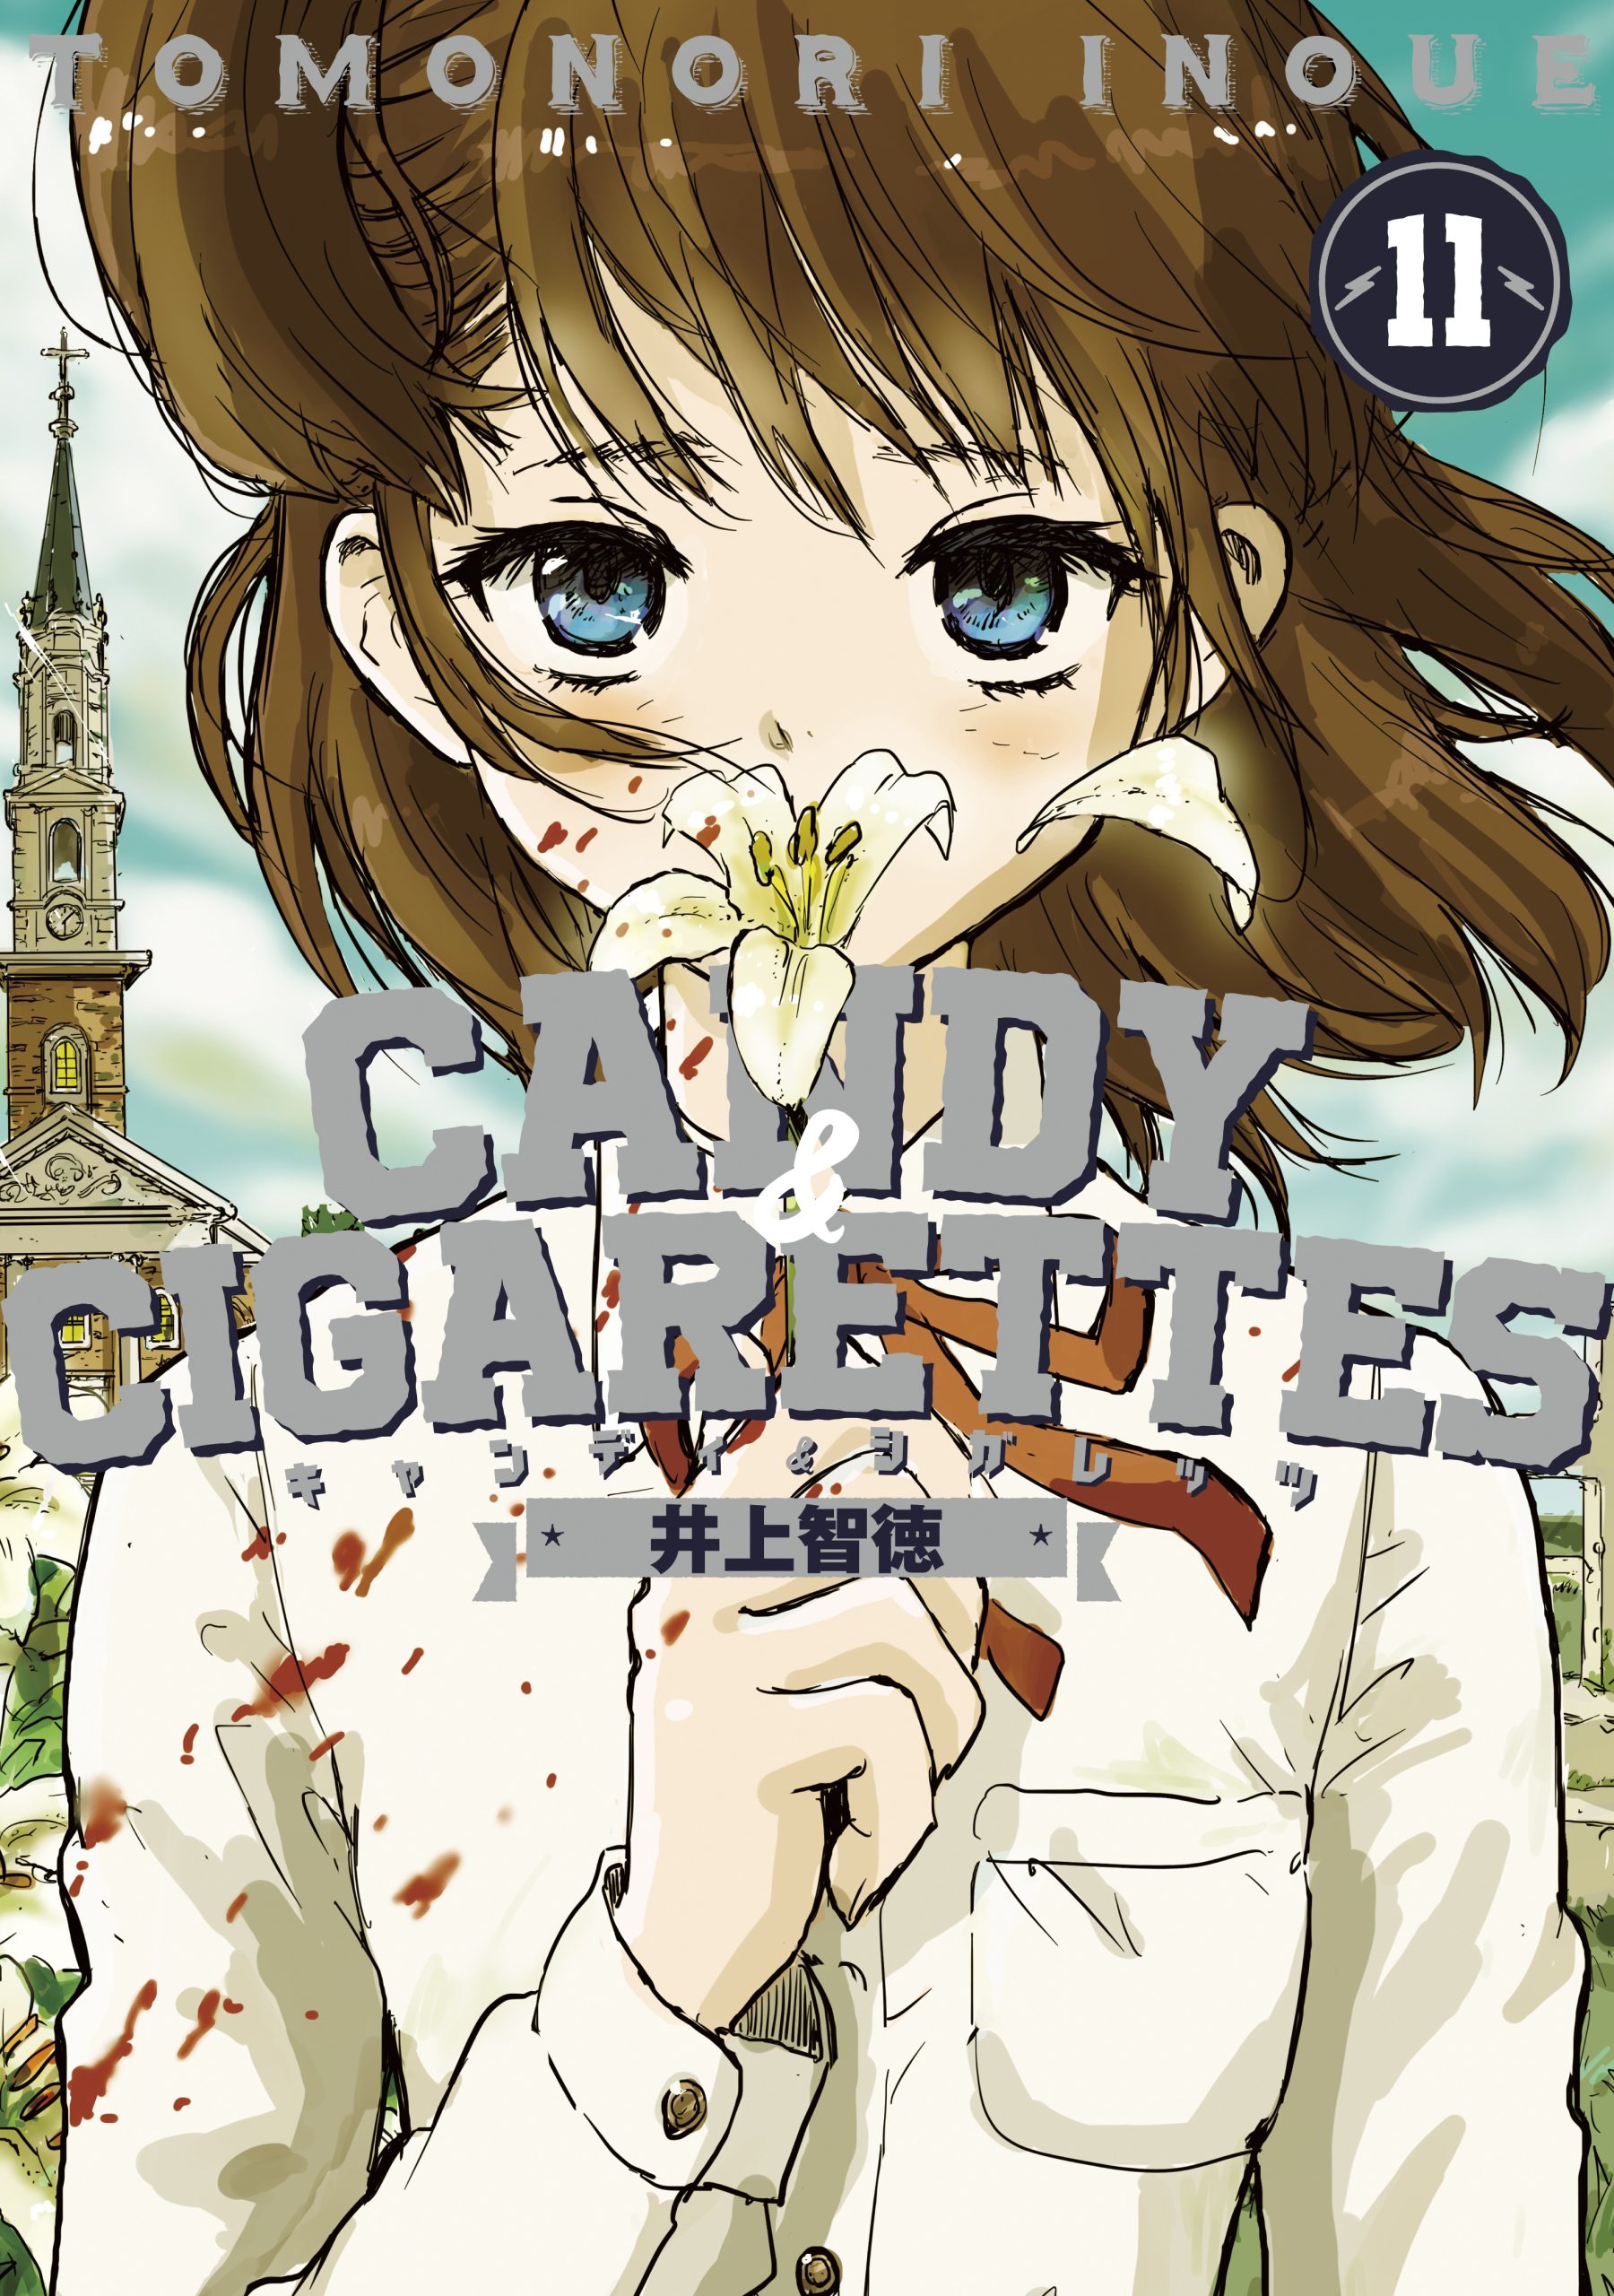 Candy & Cigarettes